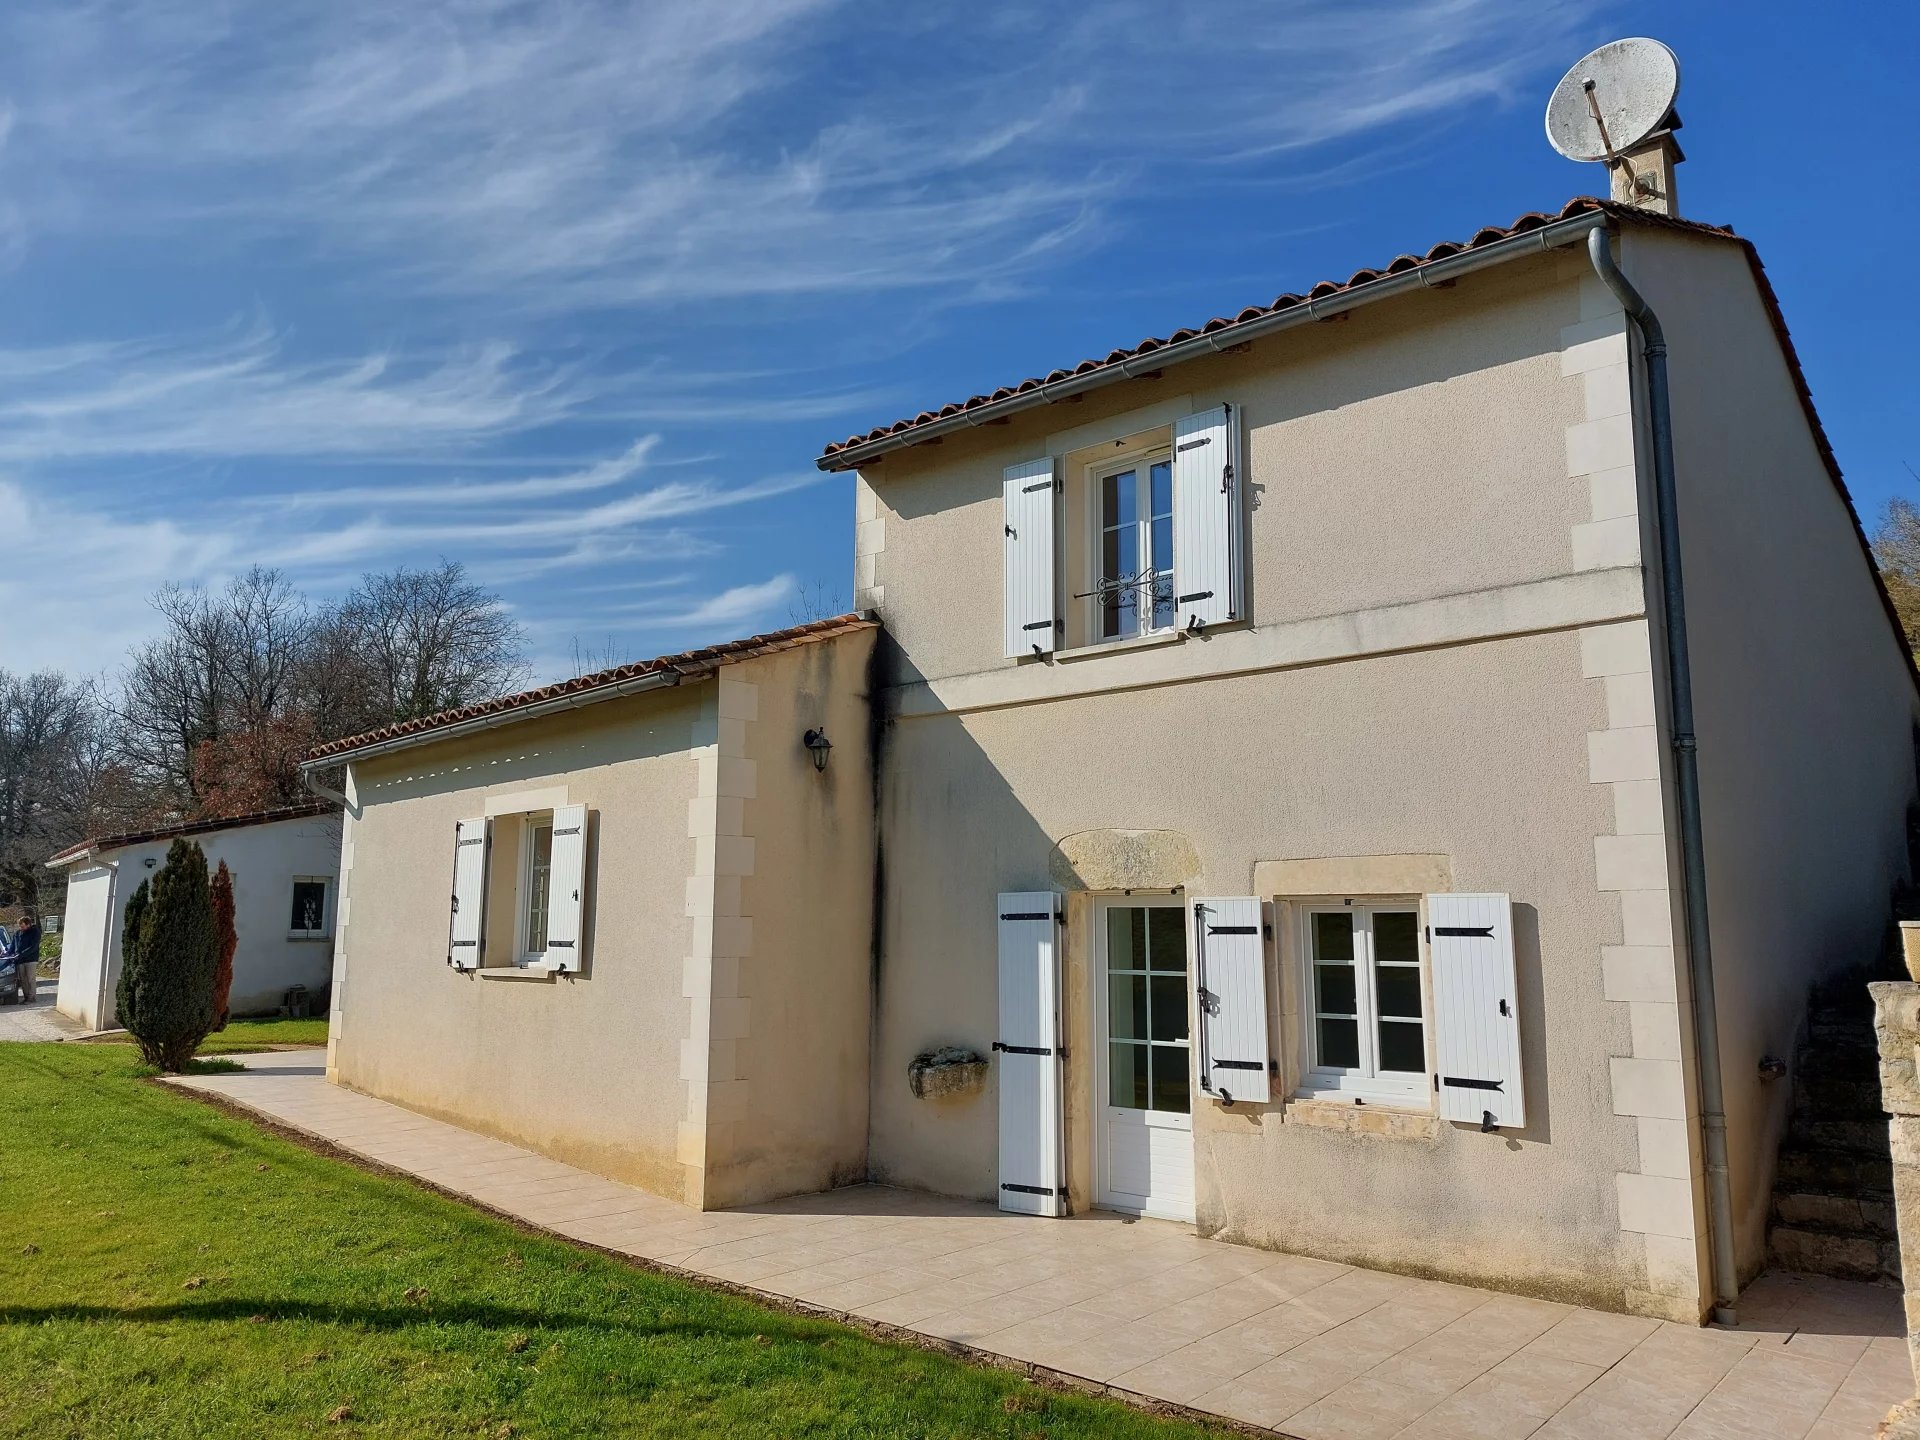 House, 2 bedrooms, 5 minutes from Ruffec